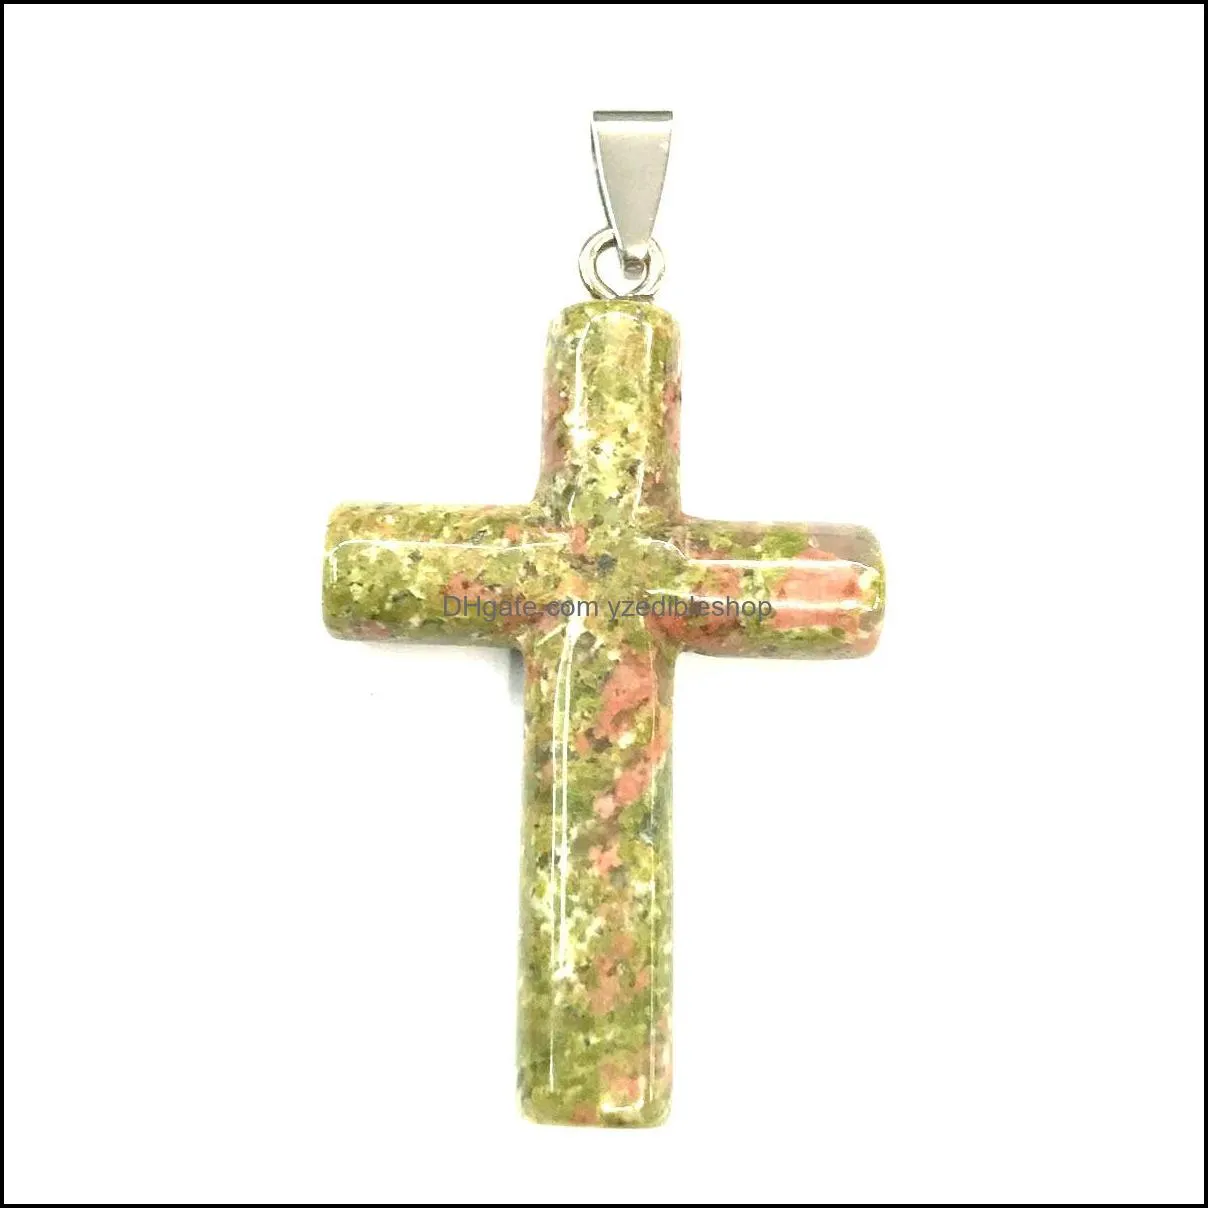 40x28mm natural crystal stone cross charms pendants for necklace jewelry making